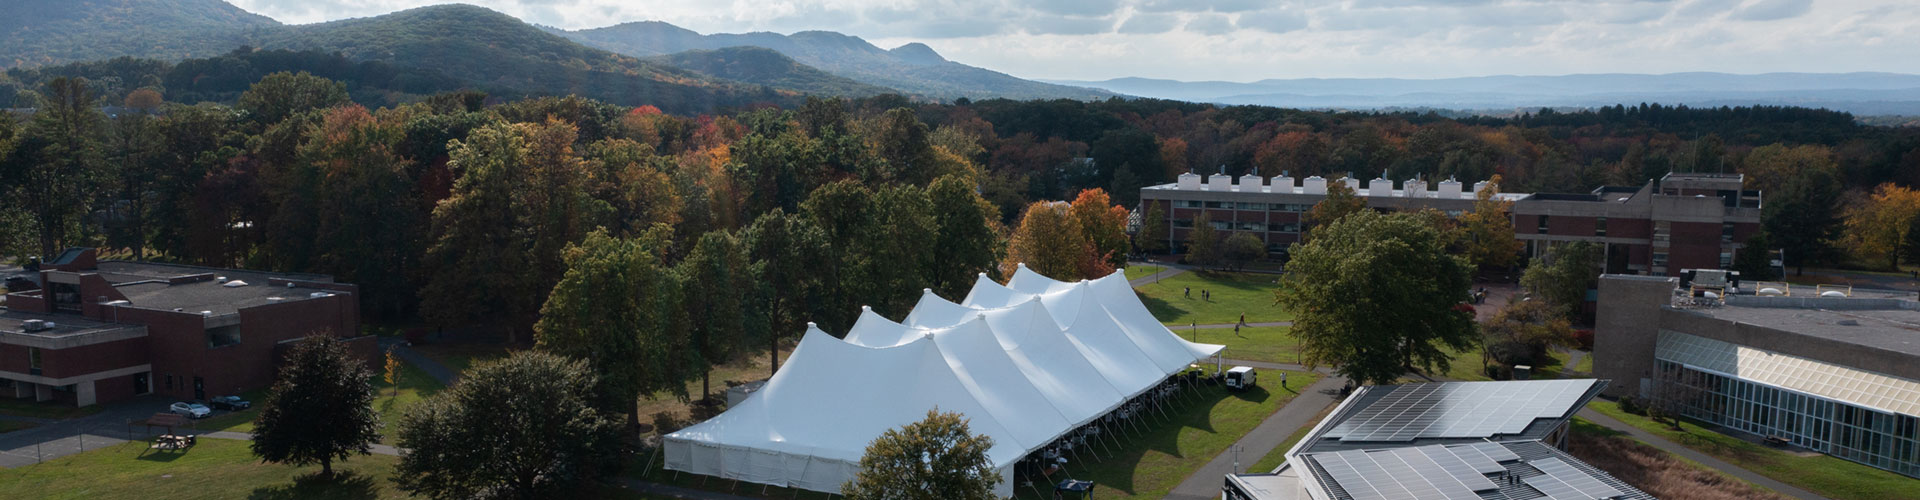 Aerial view of campus with giant white tent